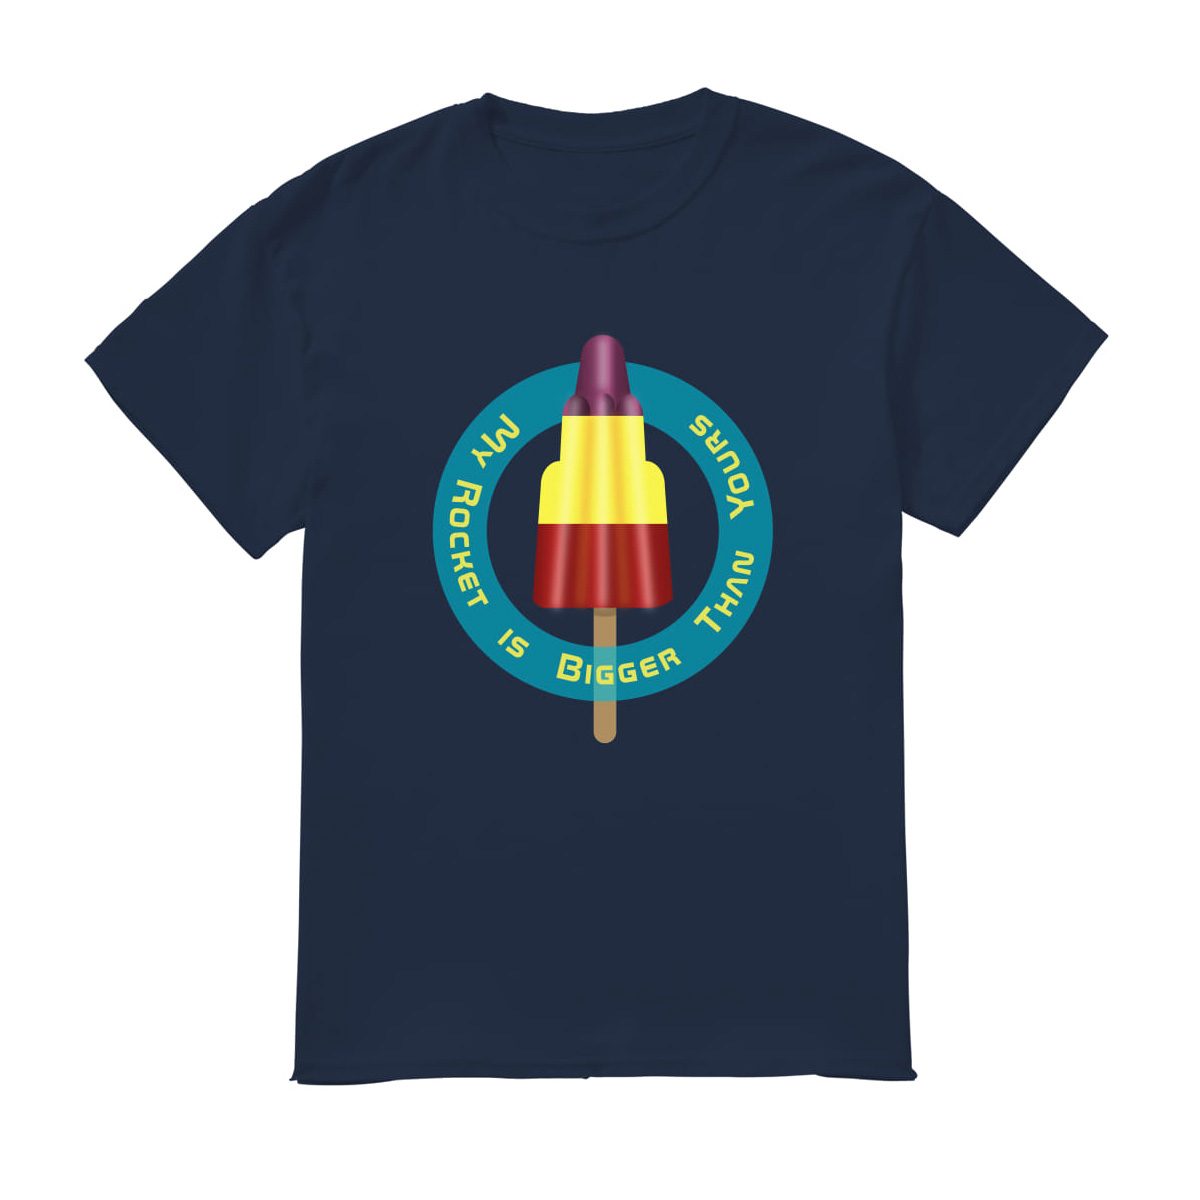 My Rocket Is Bigger Than Yours tshirt